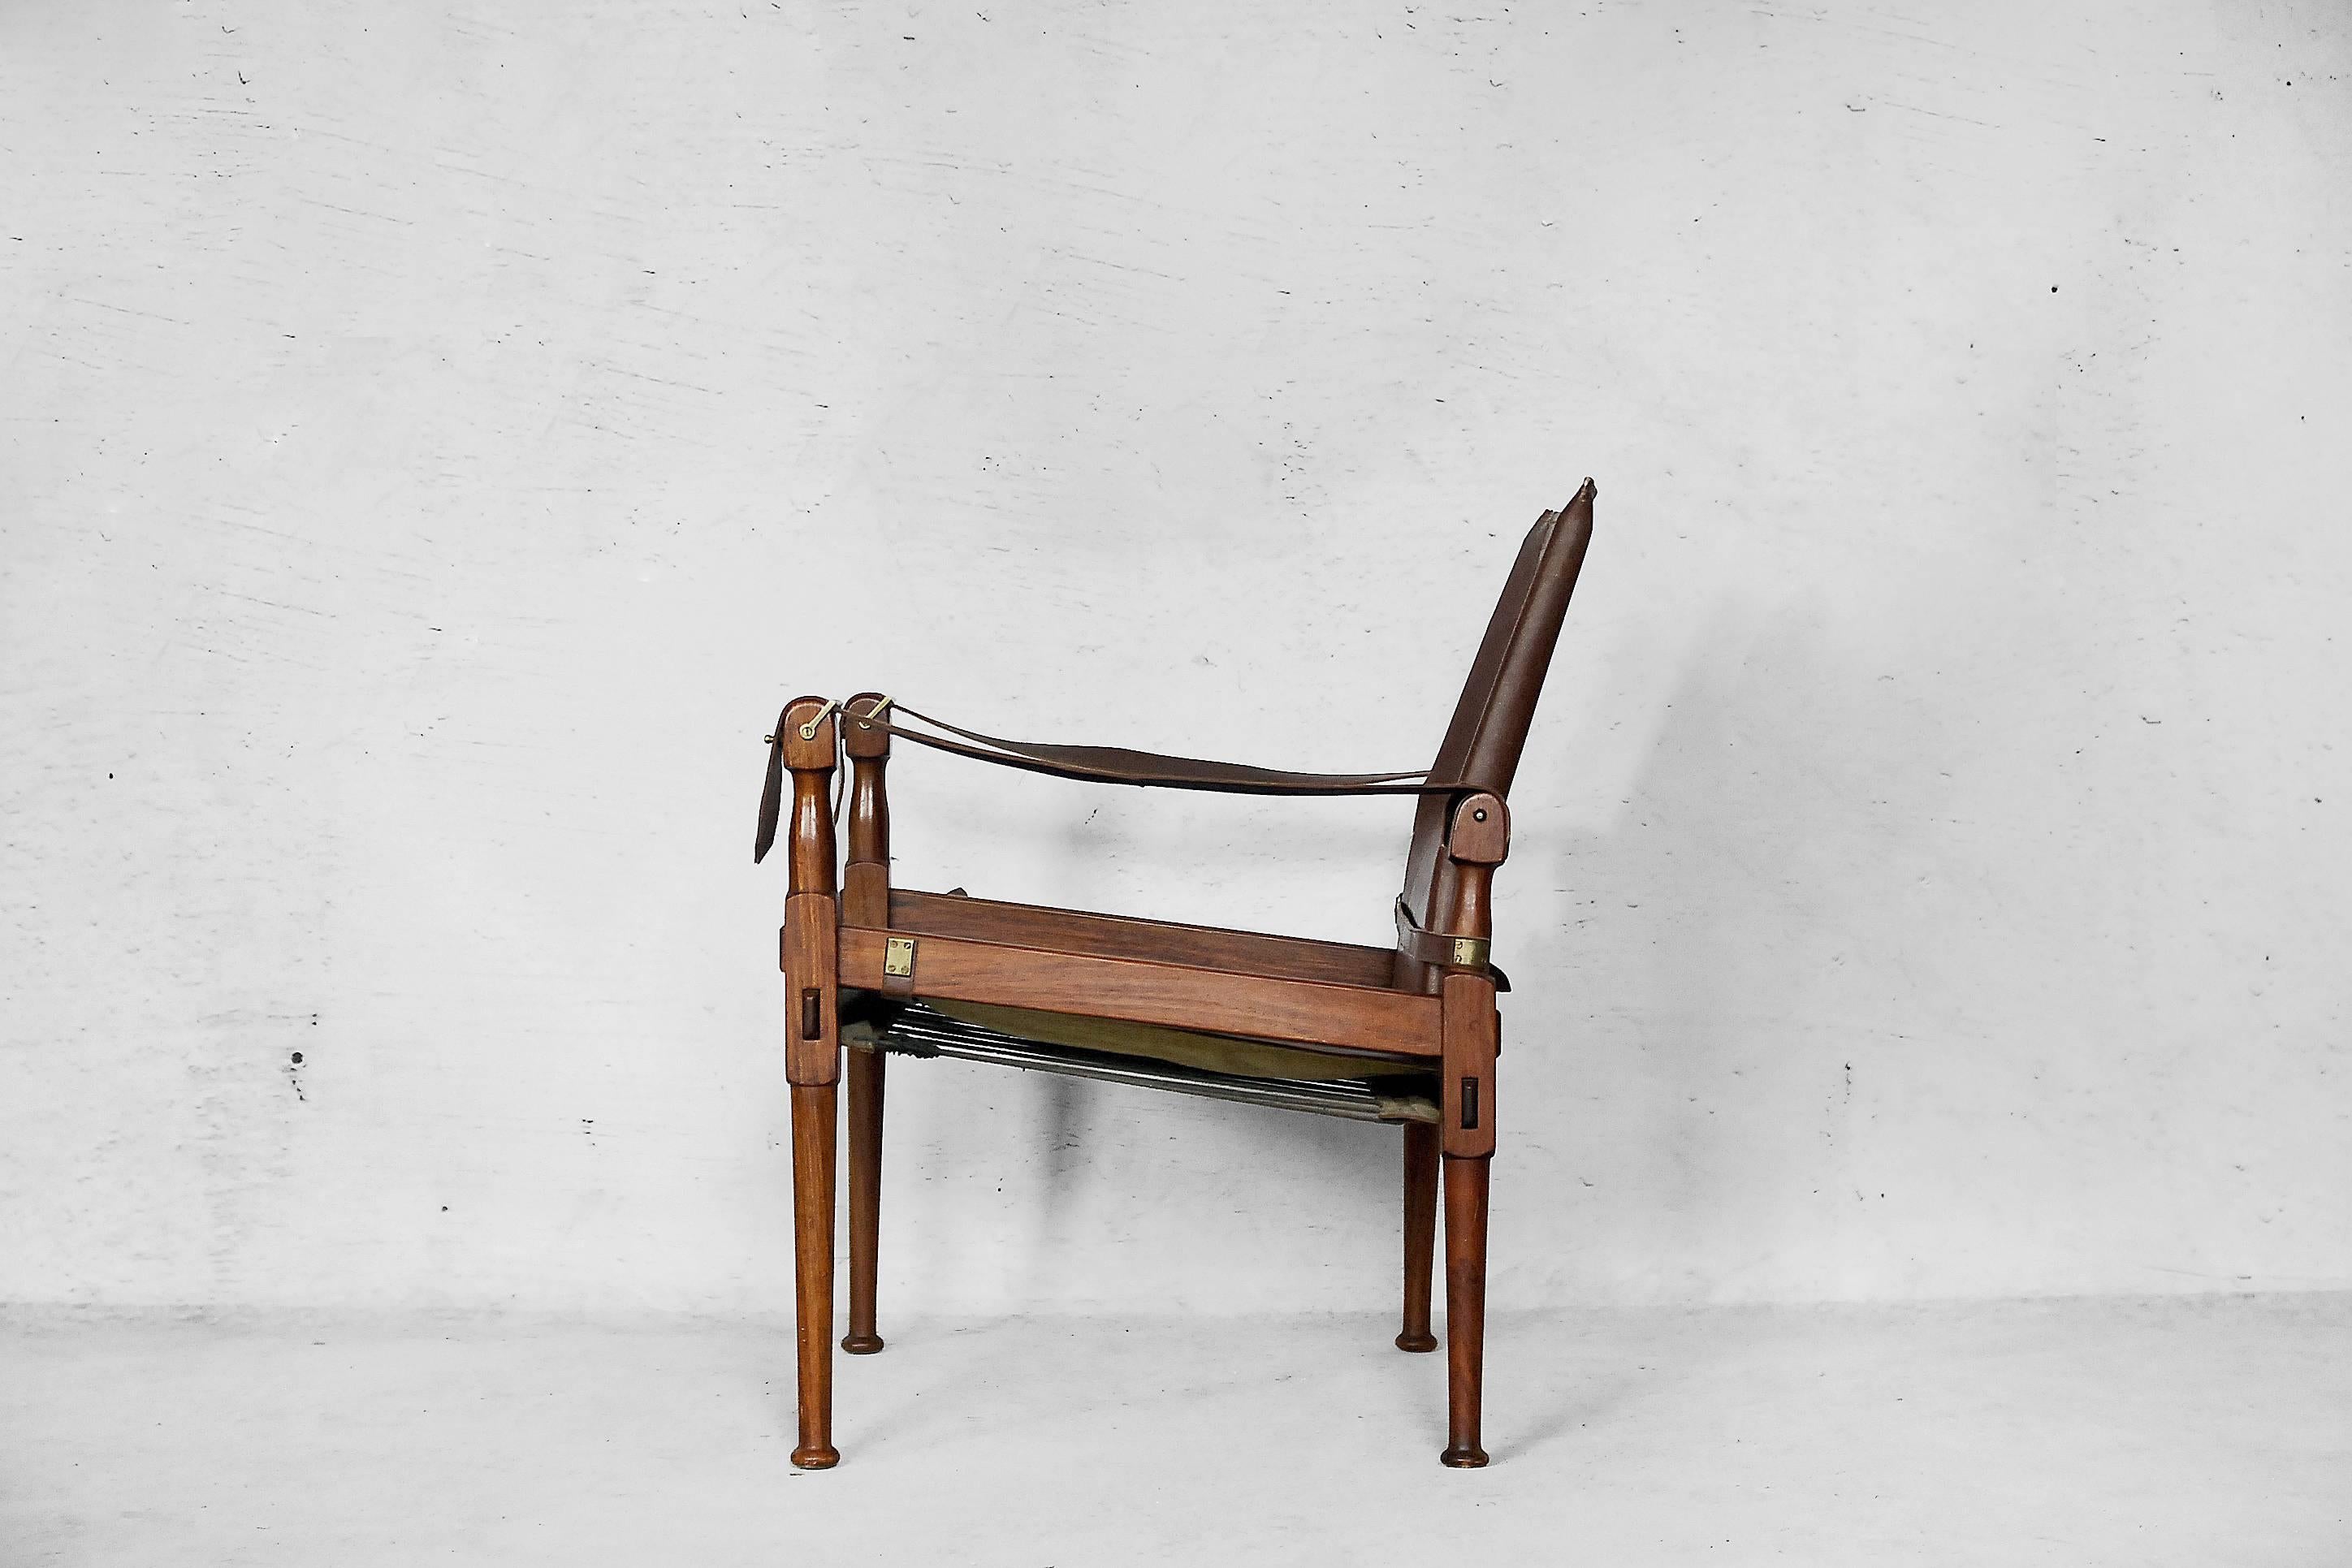 This rosewood and leather campaign chair was manufactured during the 1970s by M. Hayat & Bros. The chair has a wooden frame with a leather seat, back, and arms and brass hardware. This safari chair has a strong grain to the wood and natural patina